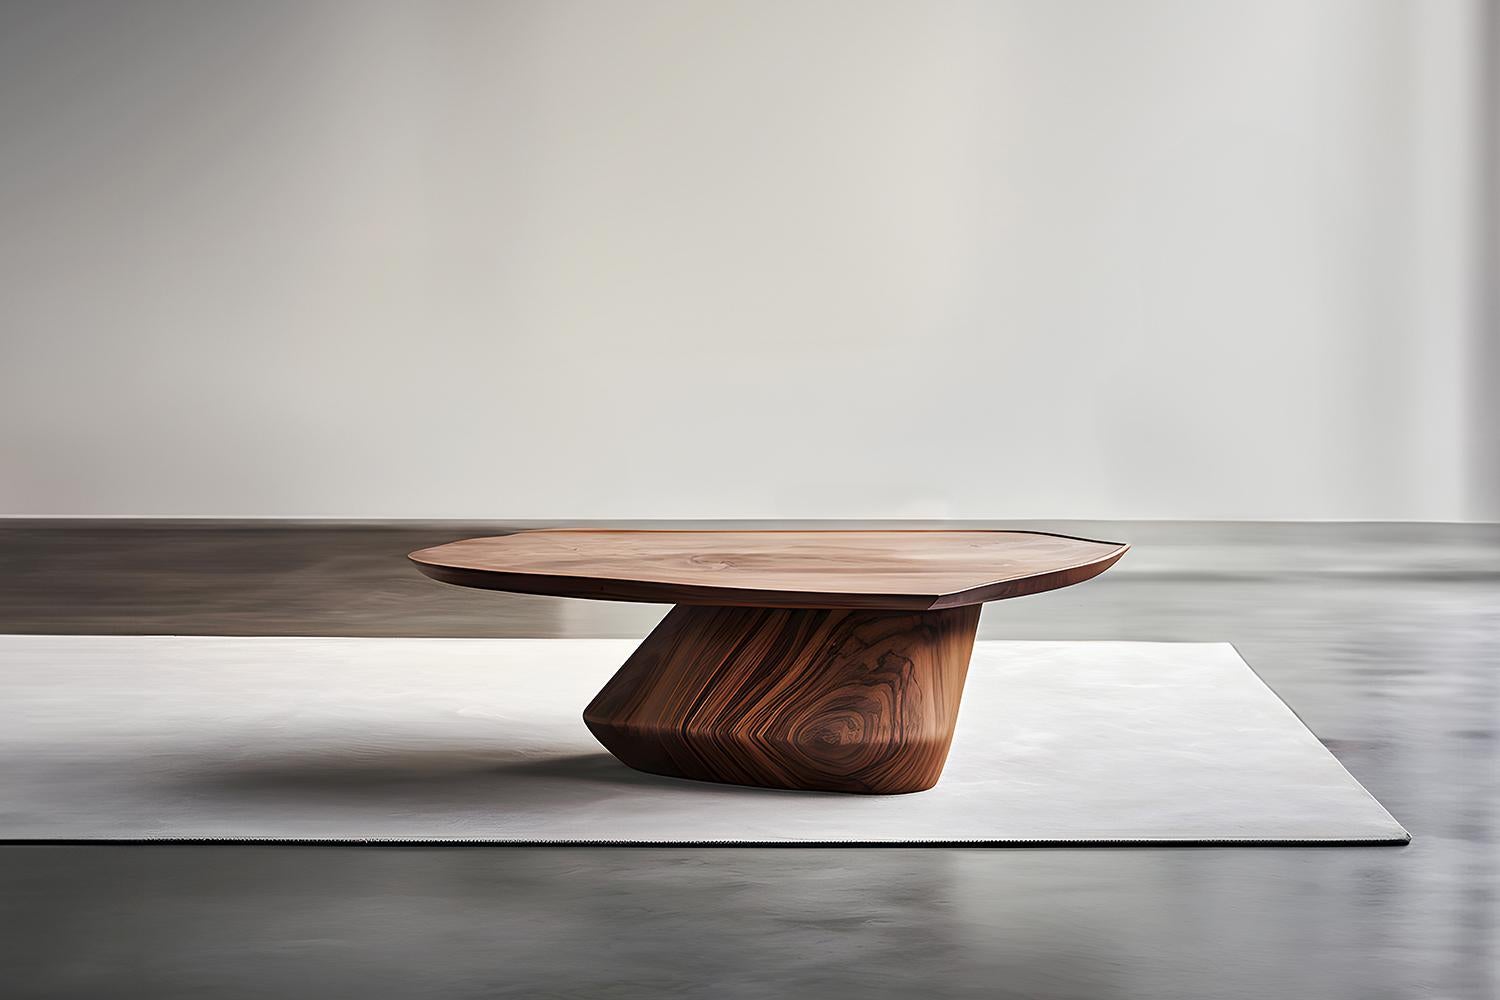 Sculptural Coffee Table Made of Solid Wood, Center Table Solace S32 by Joel Escalona


The Solace table series, designed by Joel Escalona, is a furniture collection that exudes balance and presence, thanks to its sensuous, dense, and irregular